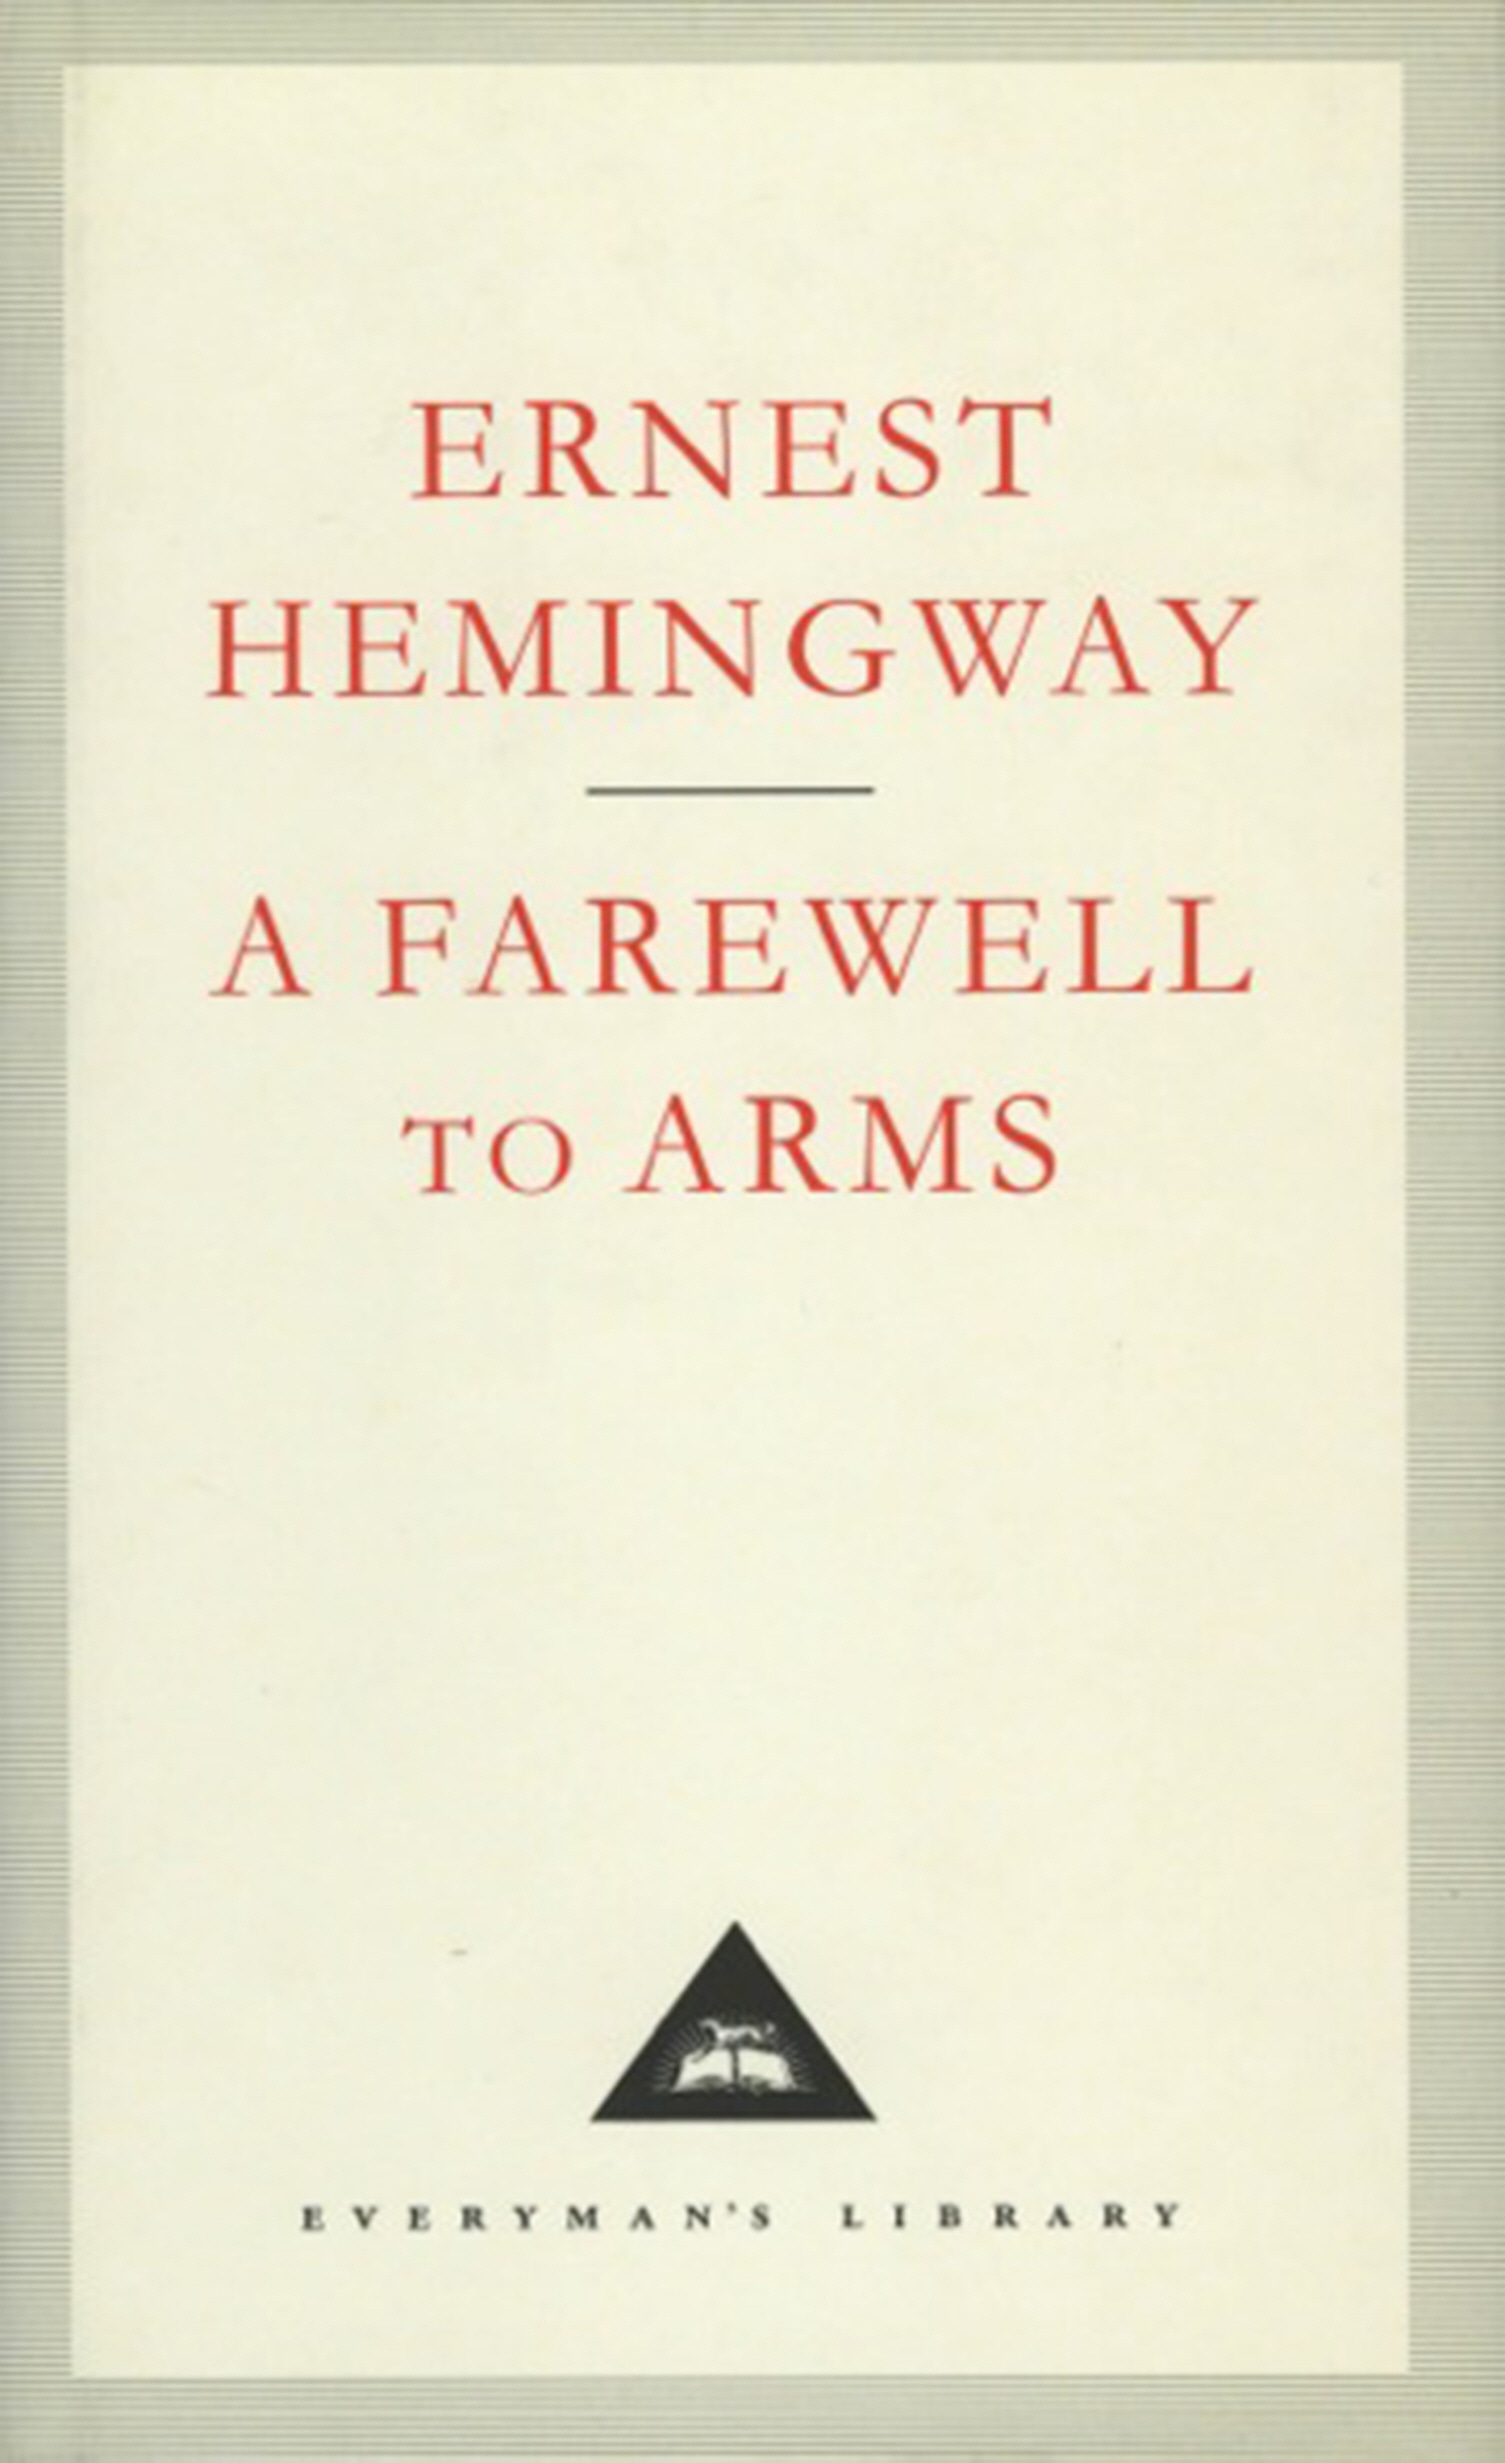 Book “A Farewell To Arms” by Ernest Hemingway — March 18, 1993